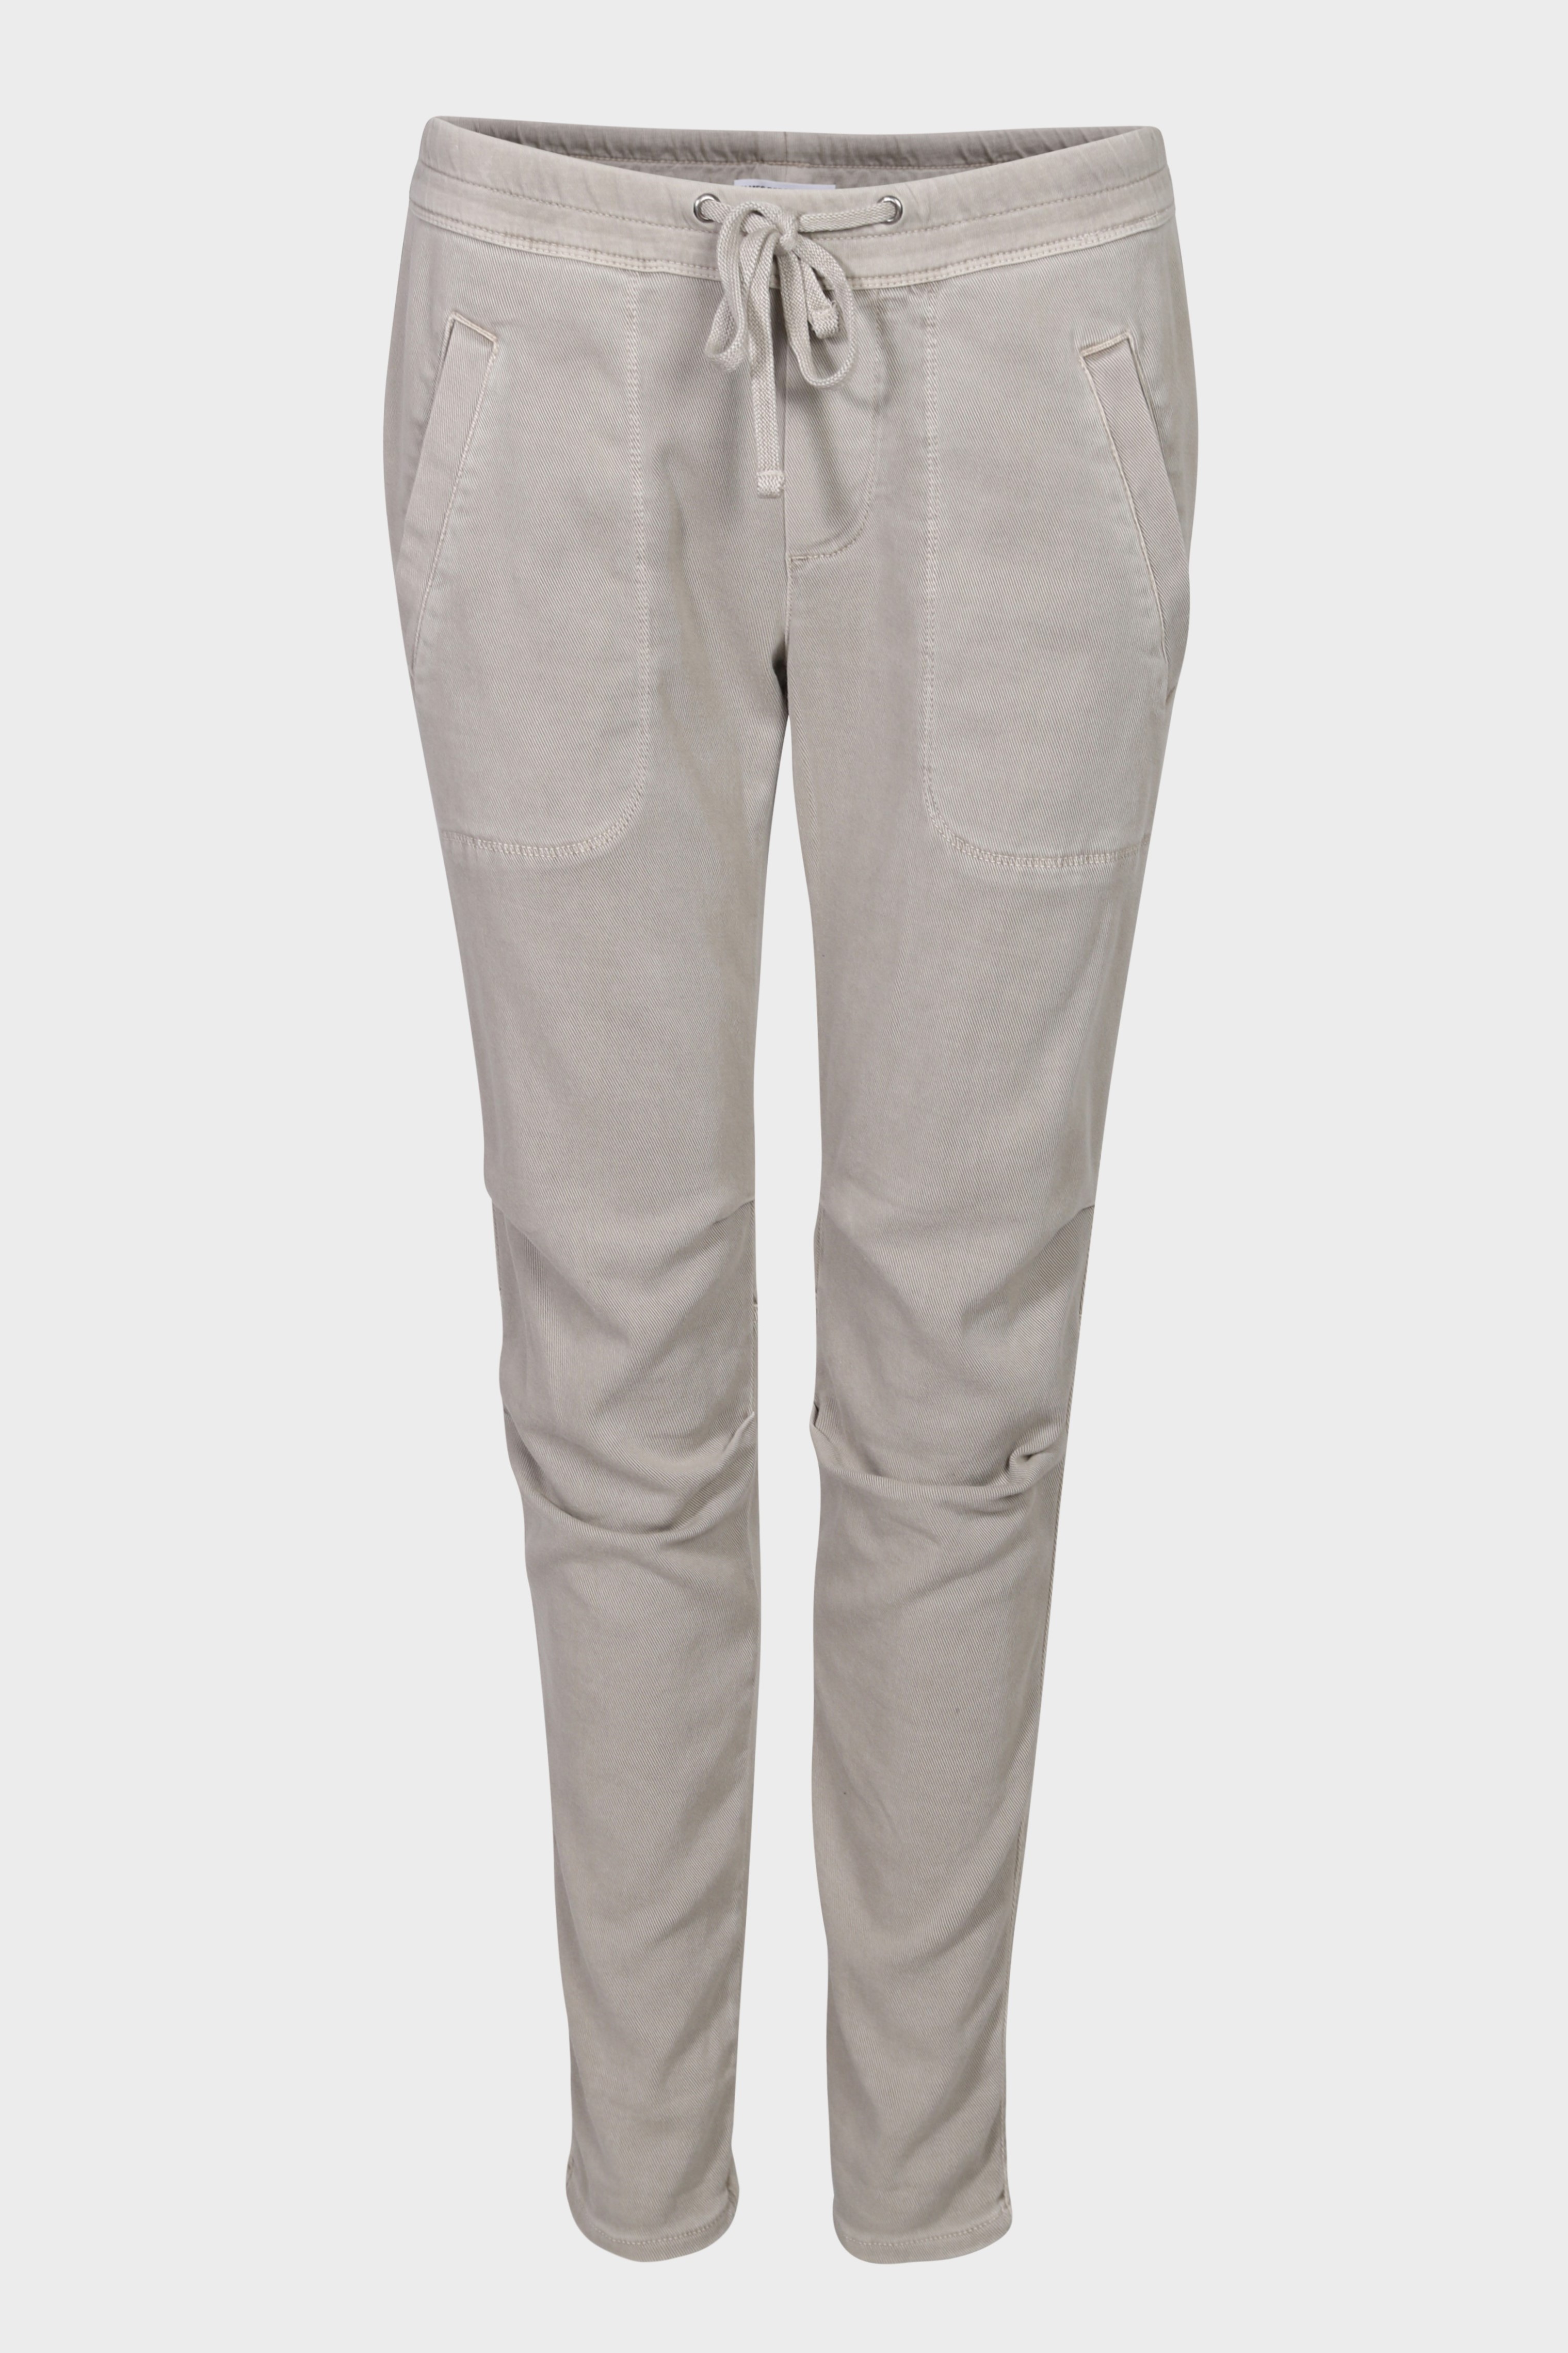 JAMES PERSE Soft Drape Utility Pant in Washed Sand